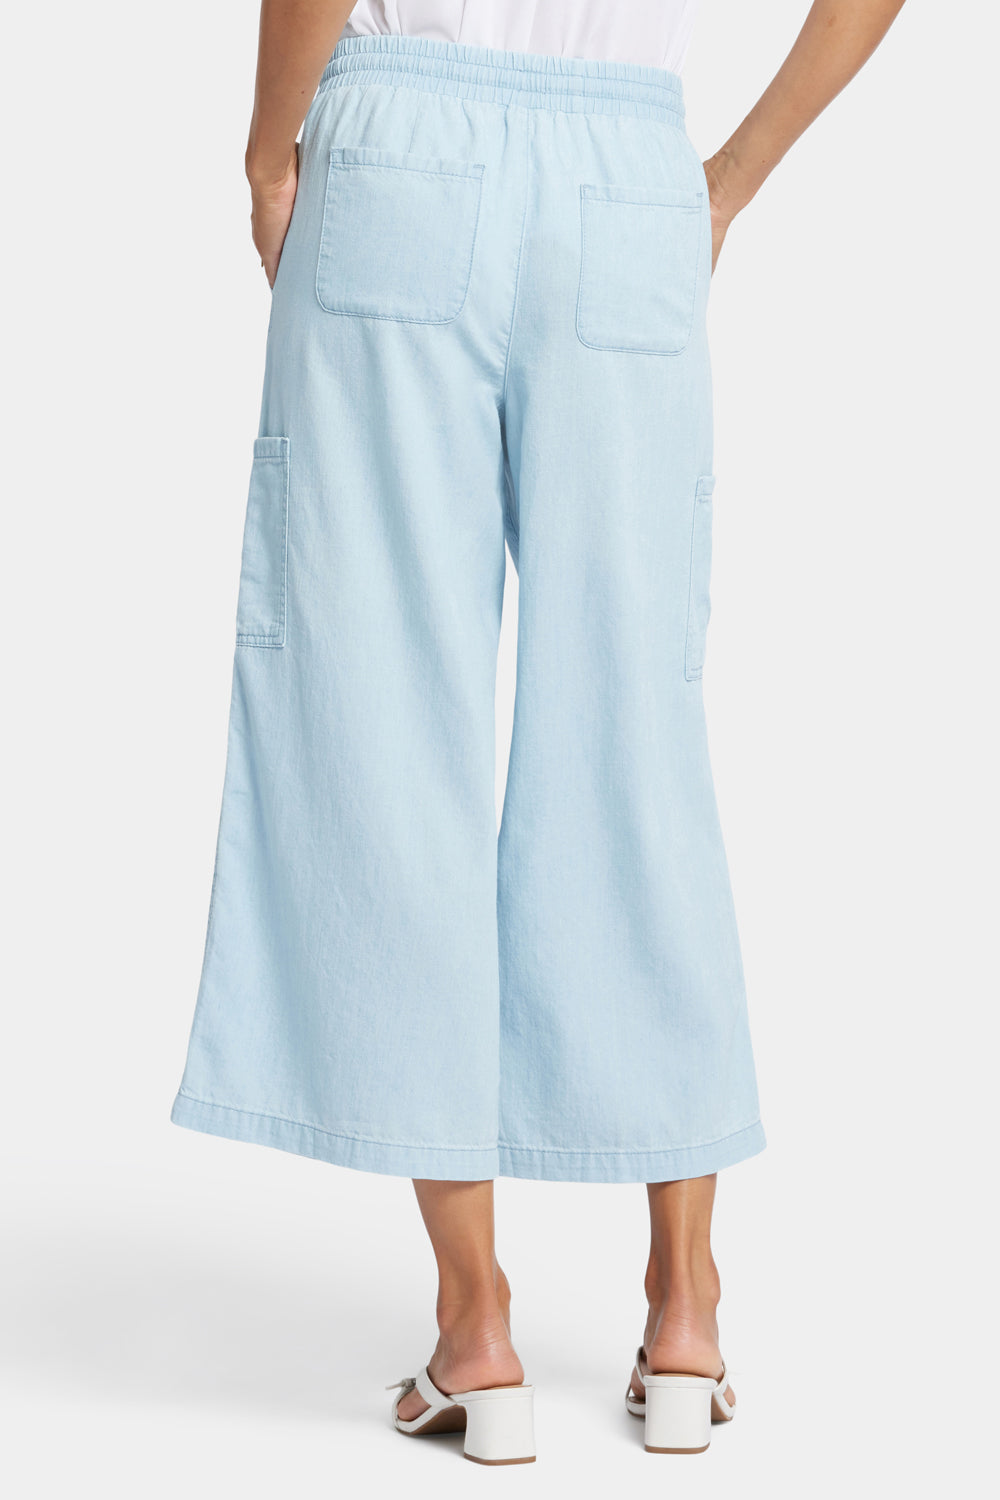 Whitney High Rise Ankle Length Pants